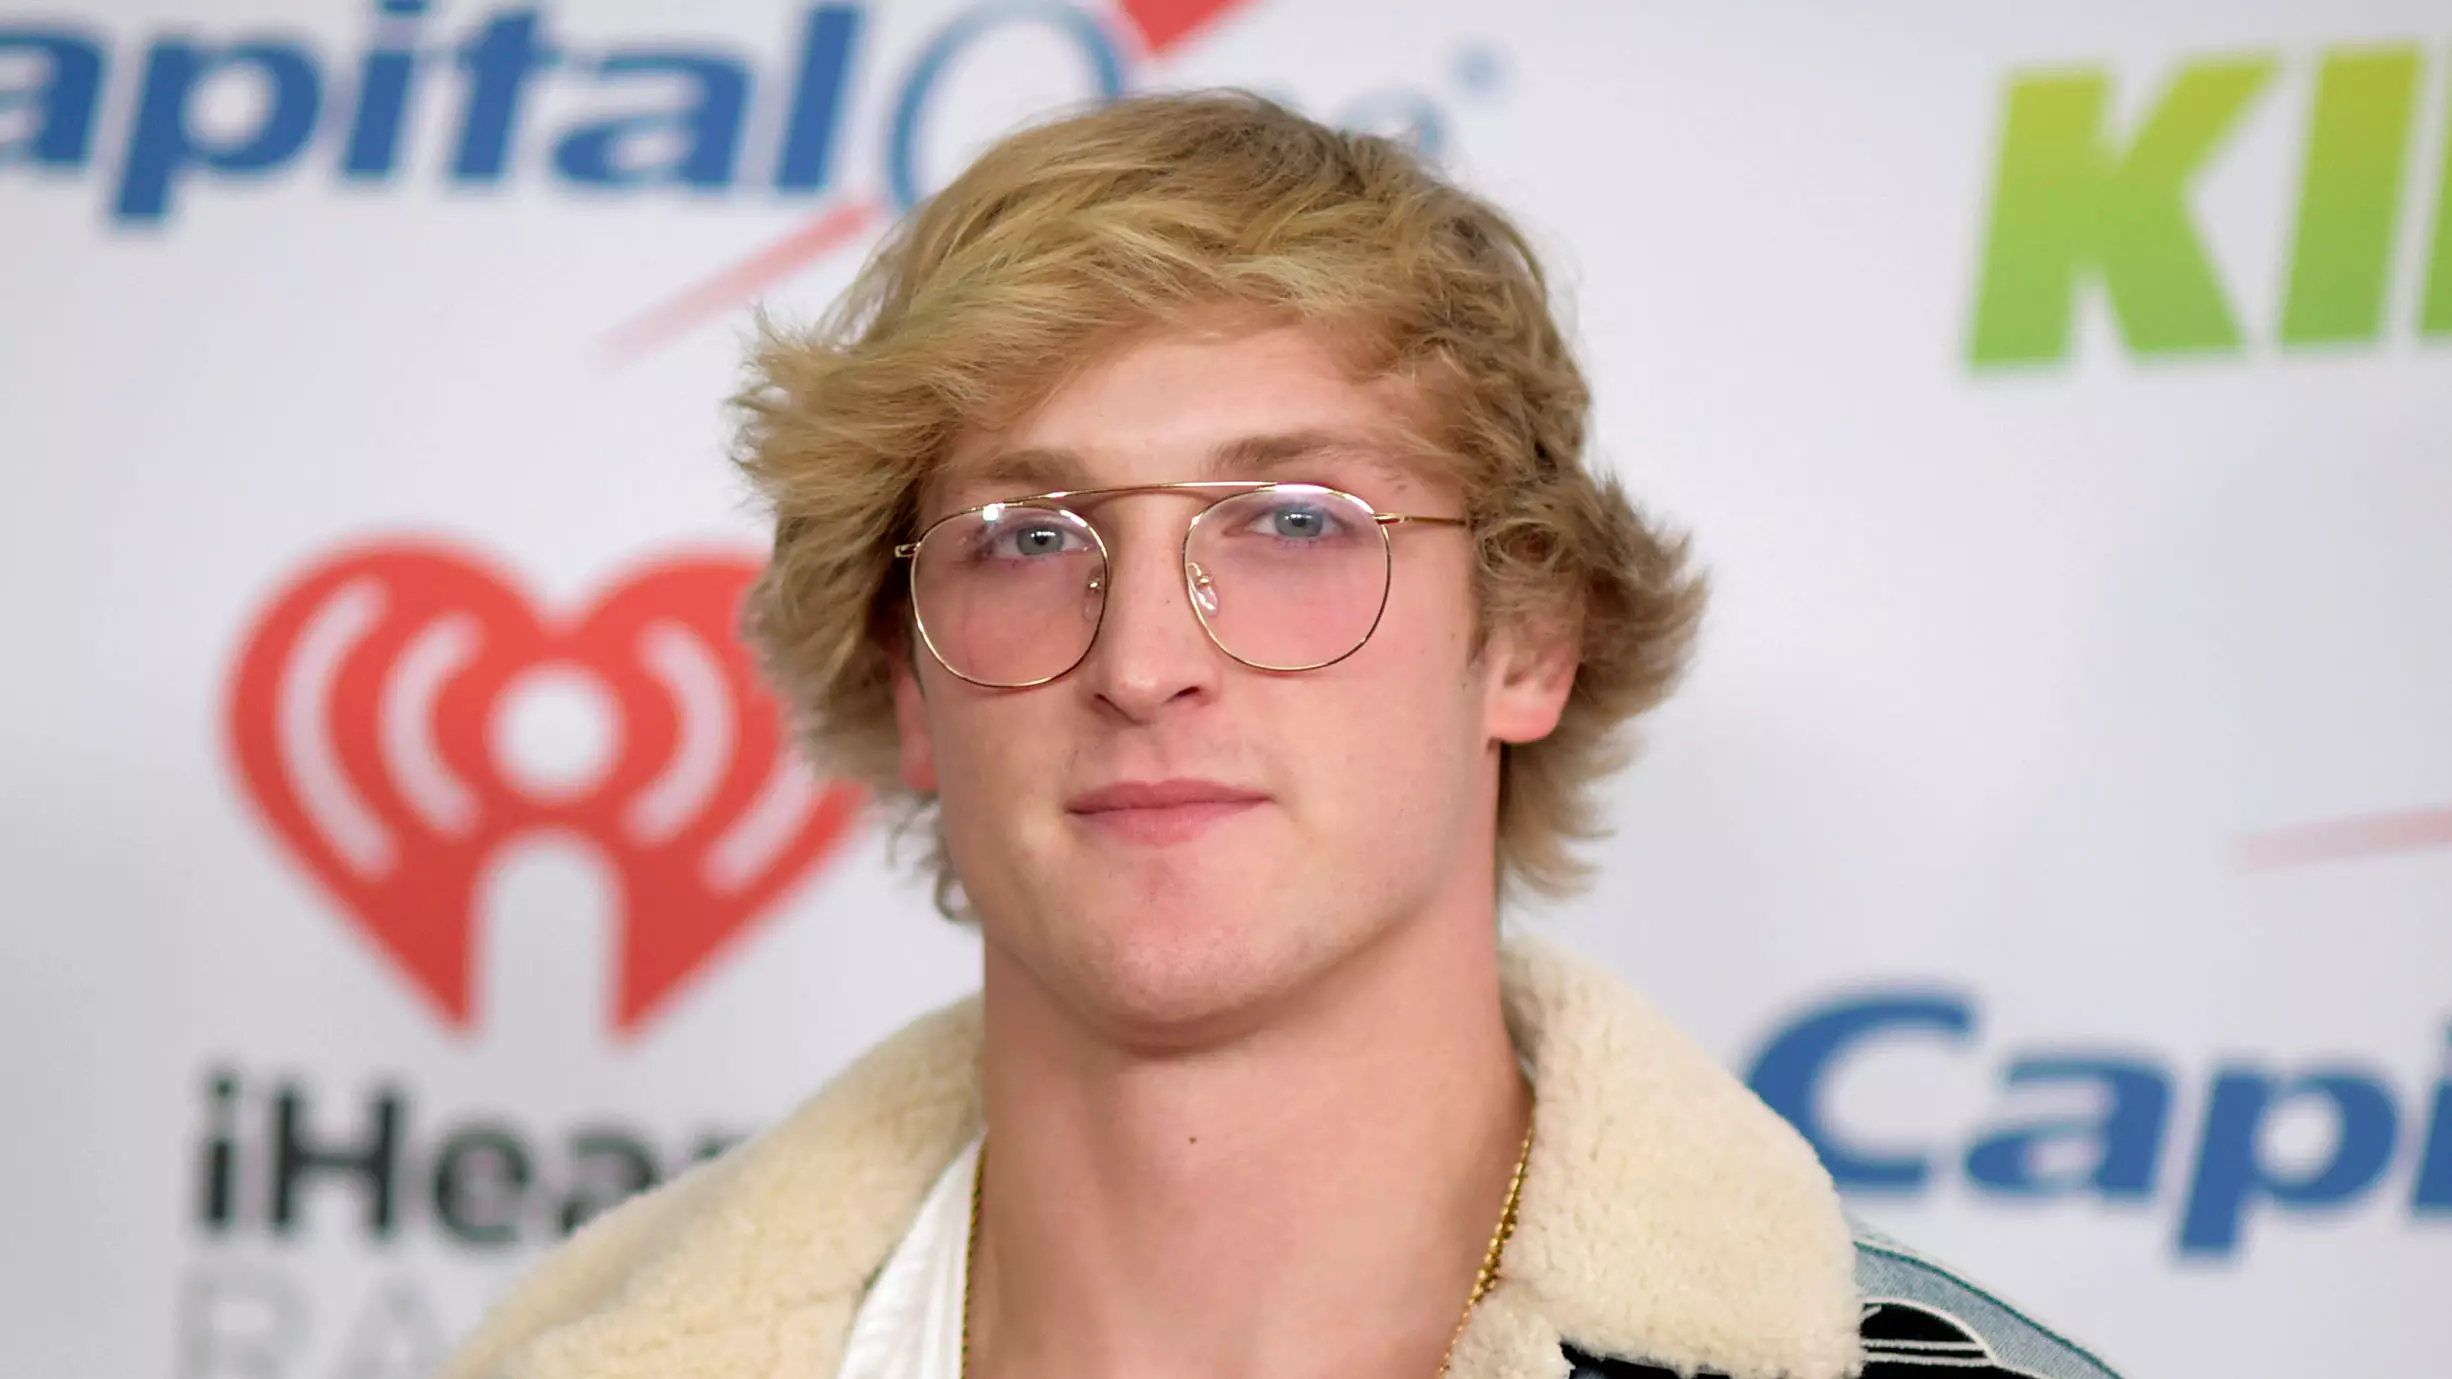 Logan Paul Says It’s 'Ironic' That People Are Telling Him To Kill Himself